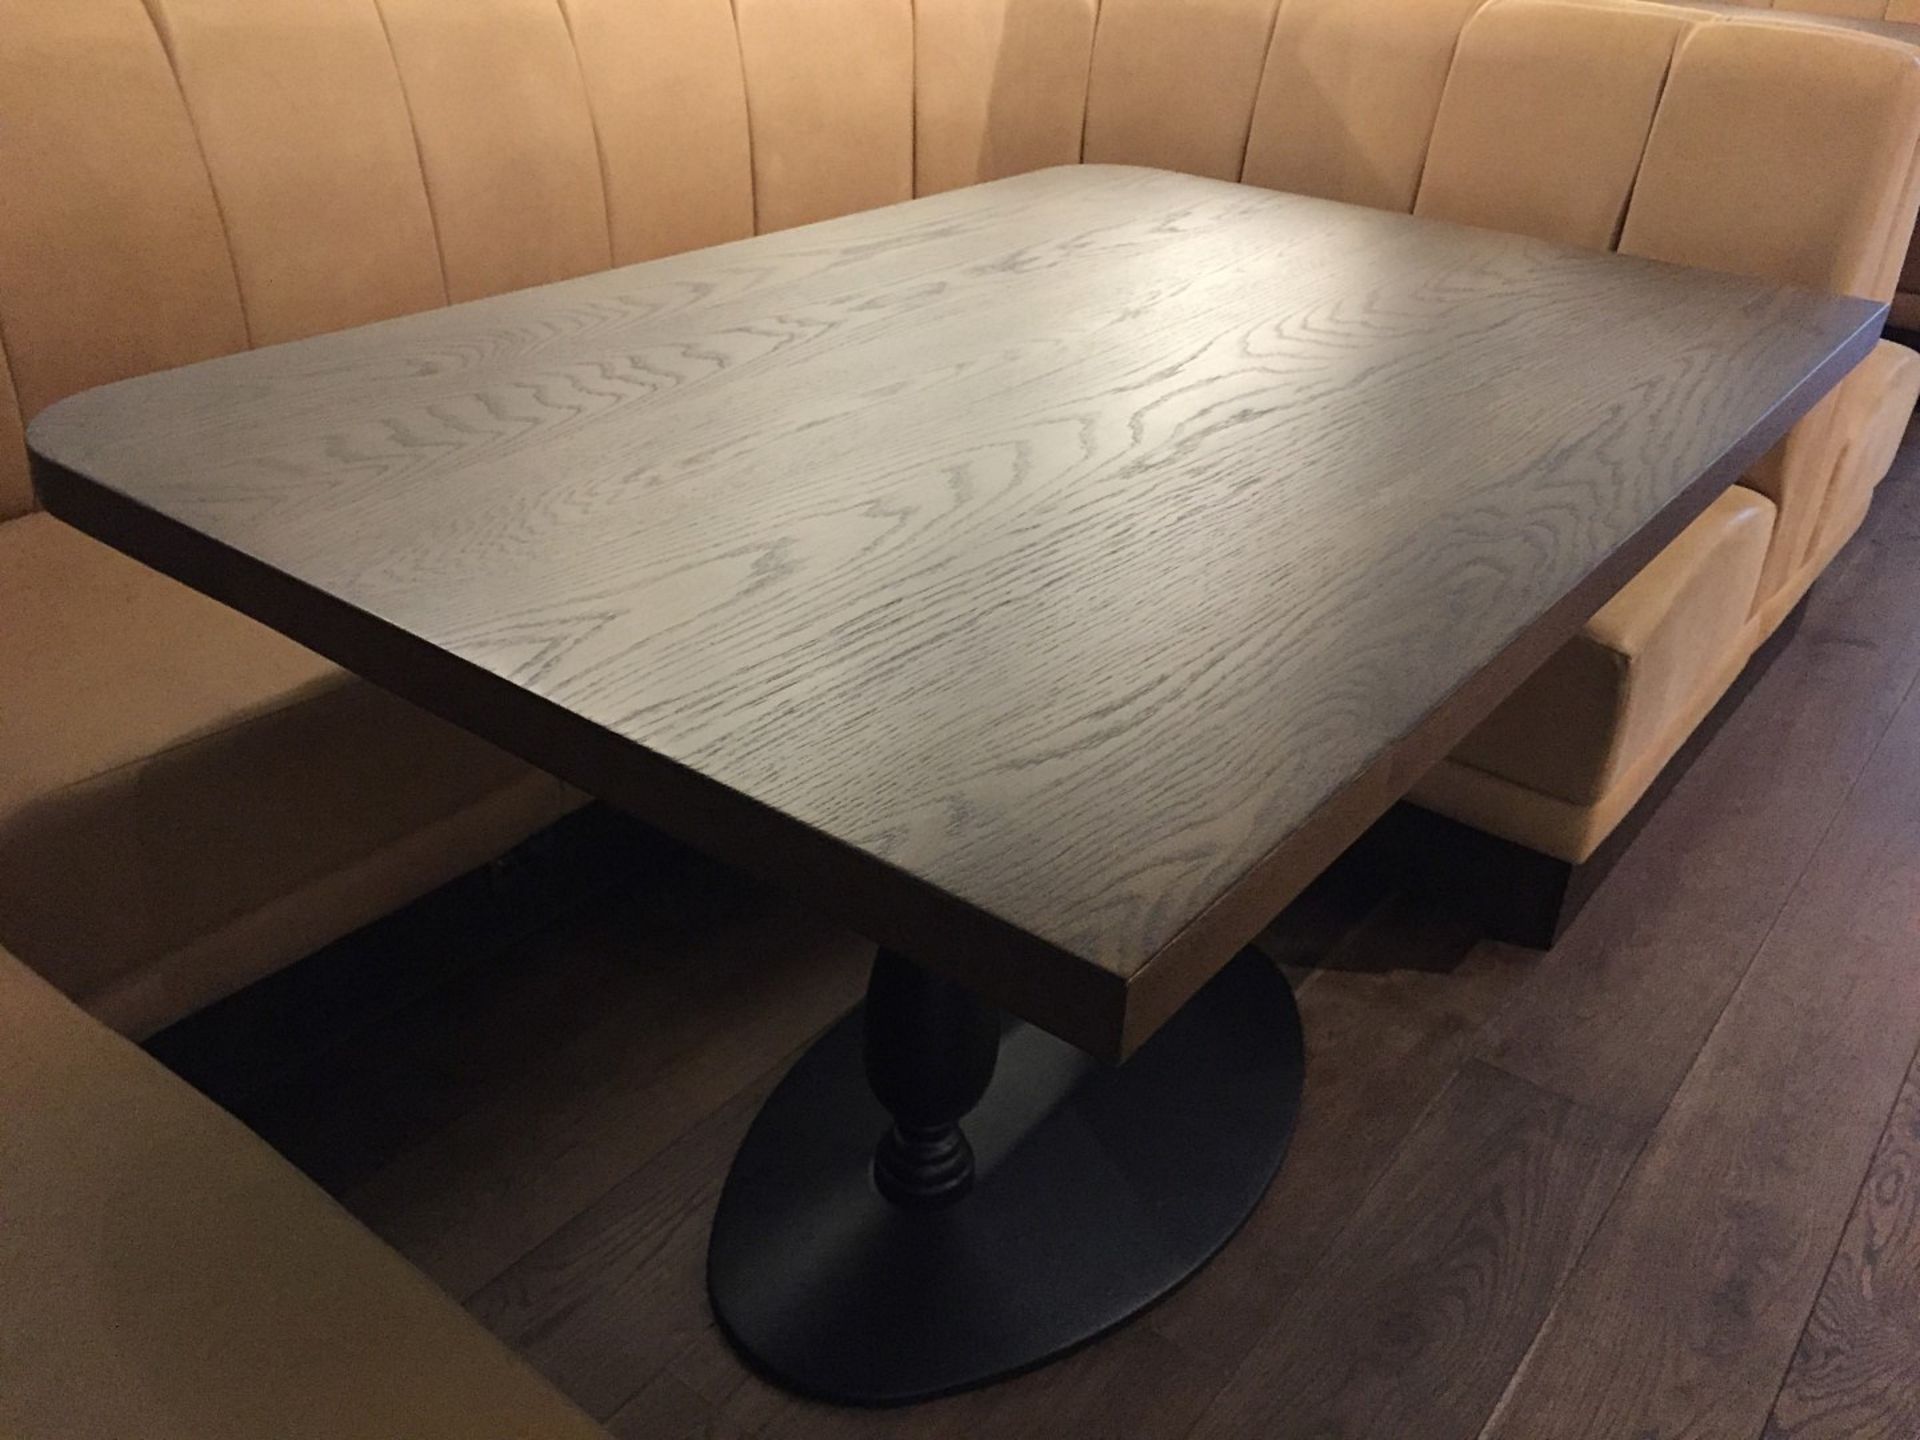 1 x Luxurious High End Shaped Restaurant Table - Features A Stunning Solid Wood Top With A